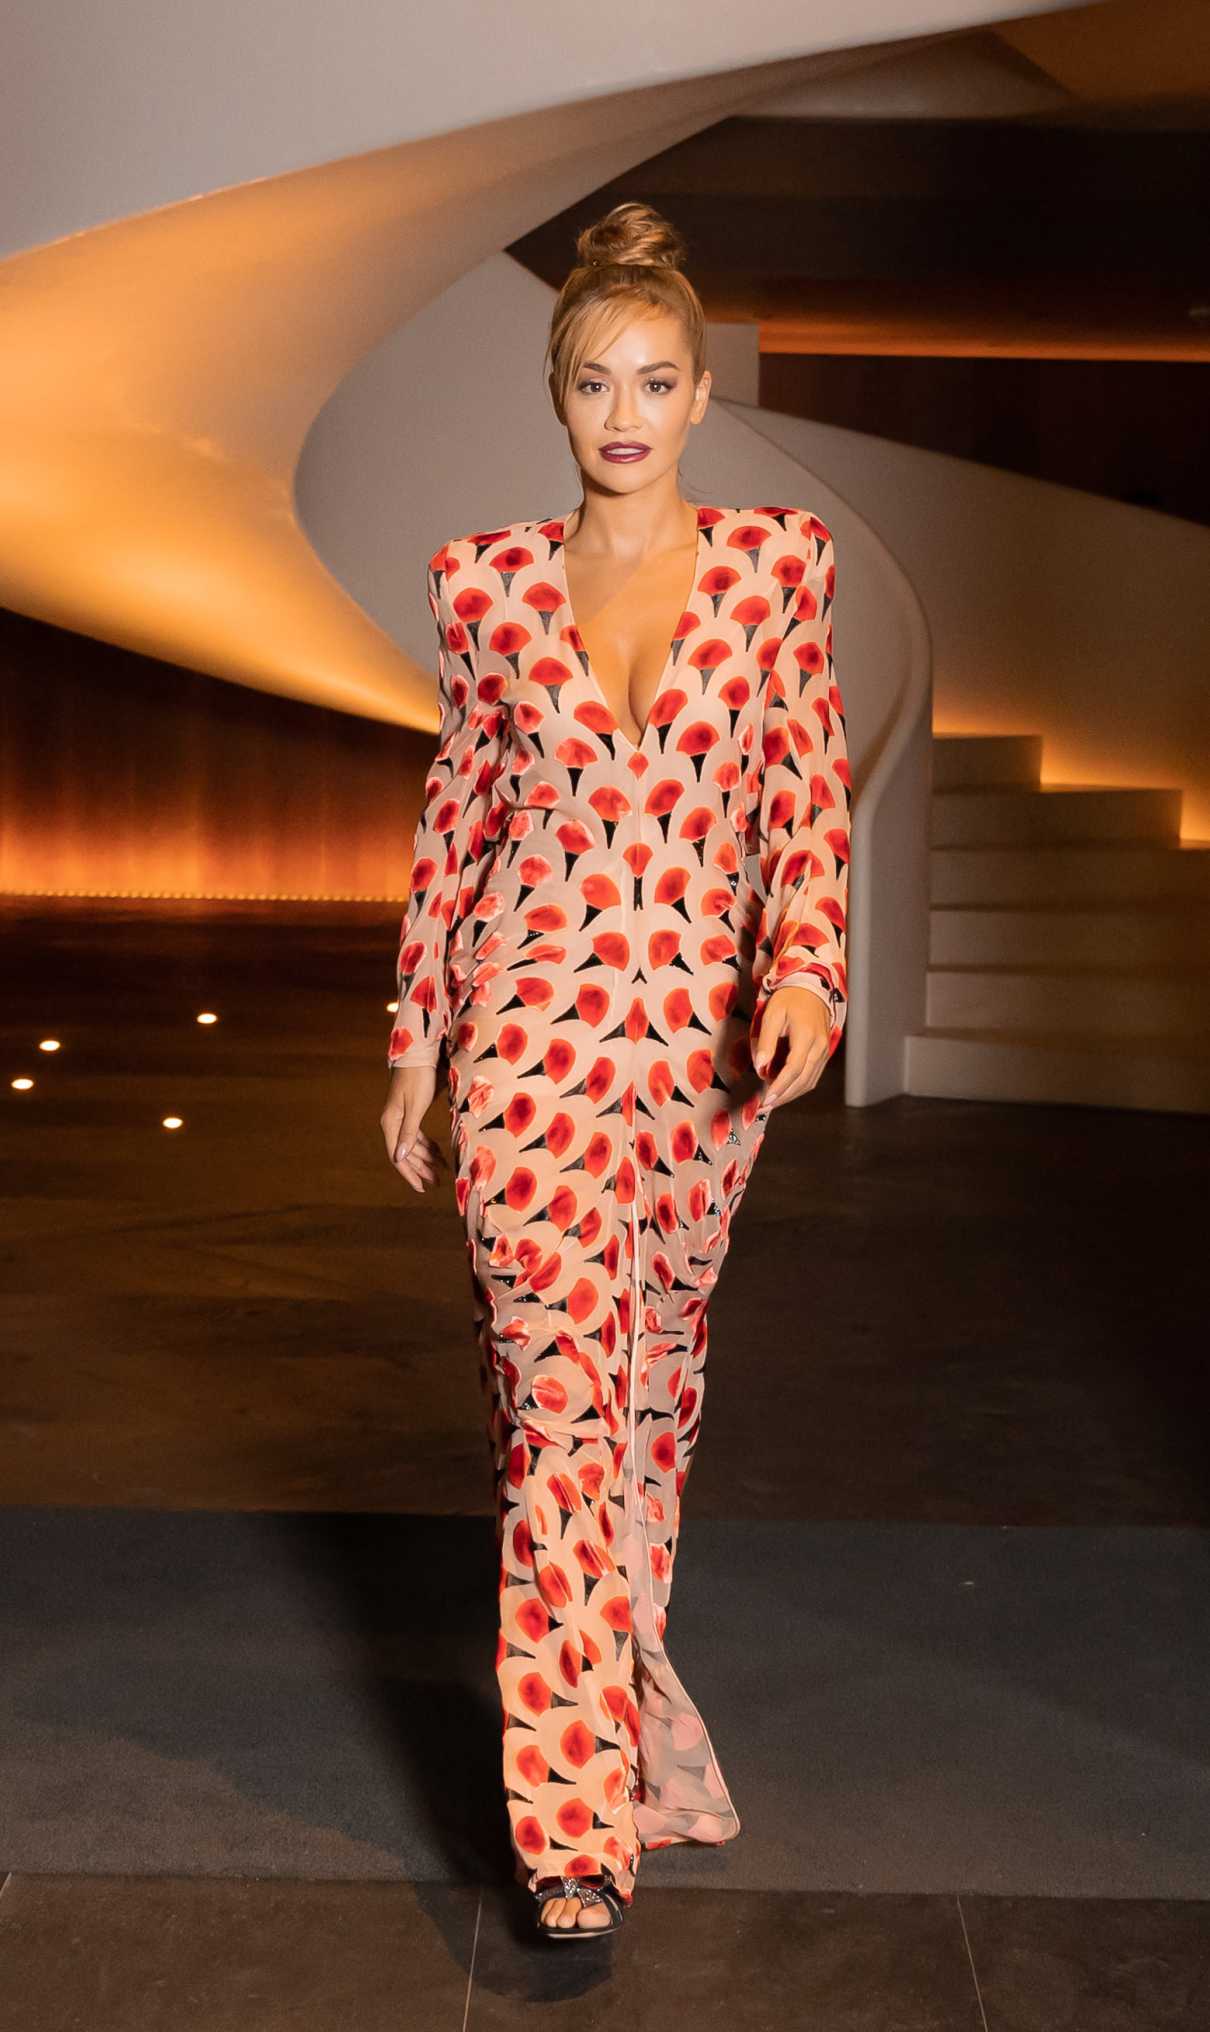 Rita Ora in a Patterned Catsuit